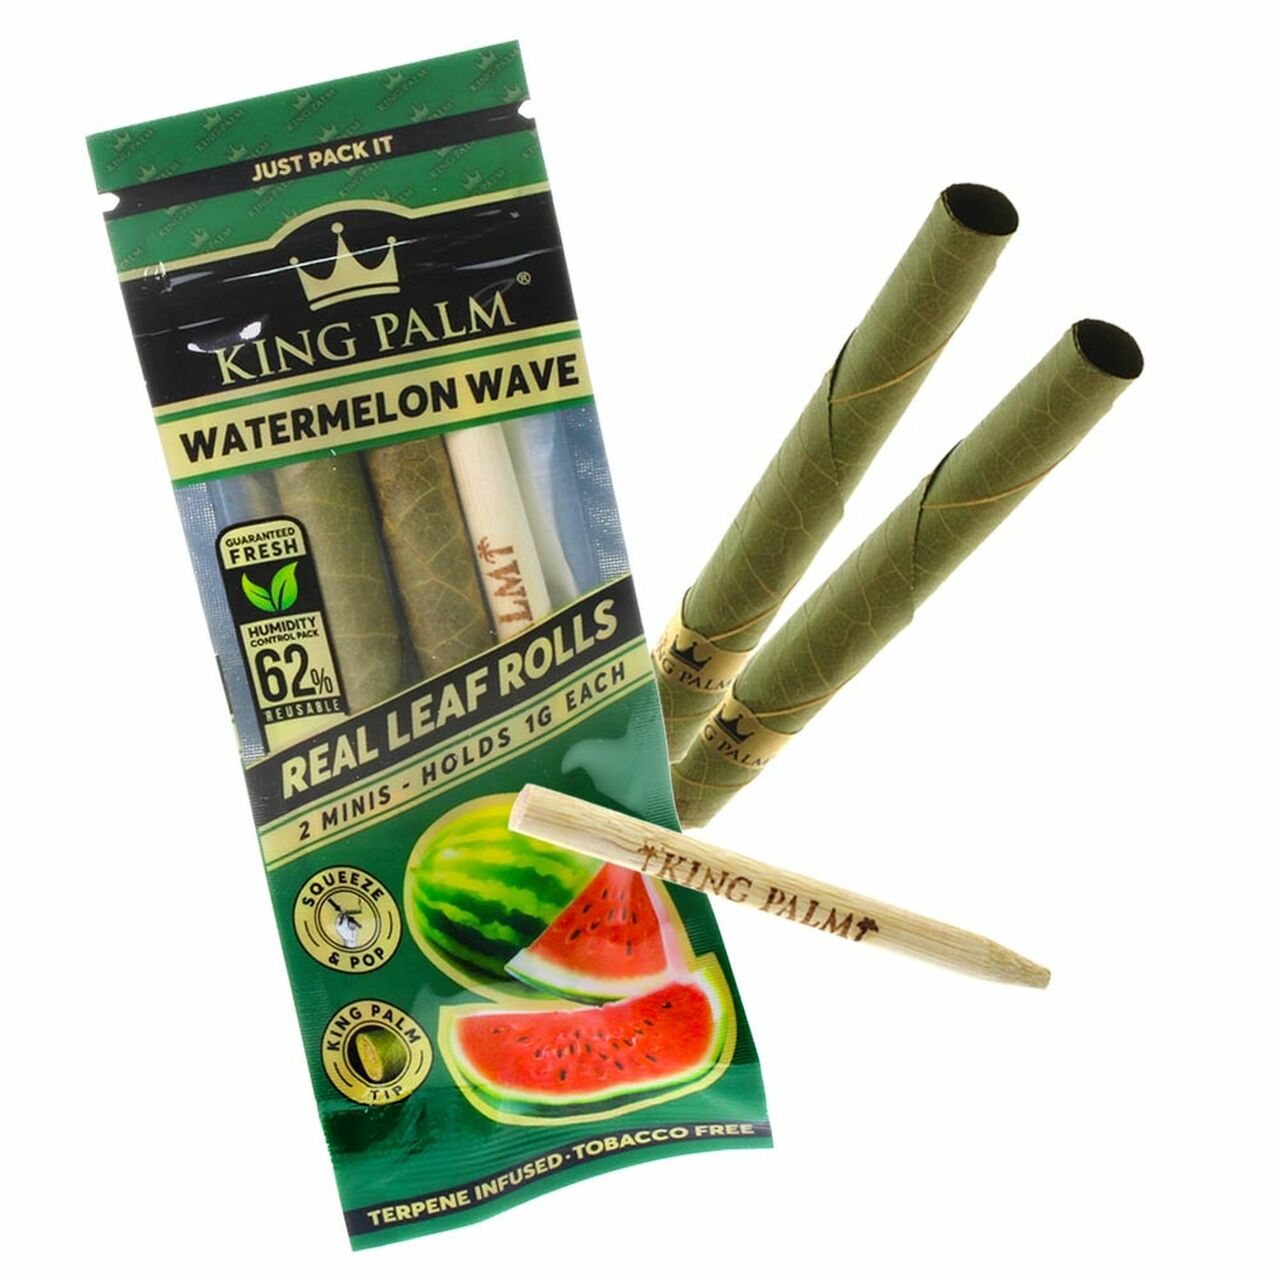 King Palm Wraps Slim 2 per Pack Watermelon Wave Pack of 20 Full Box